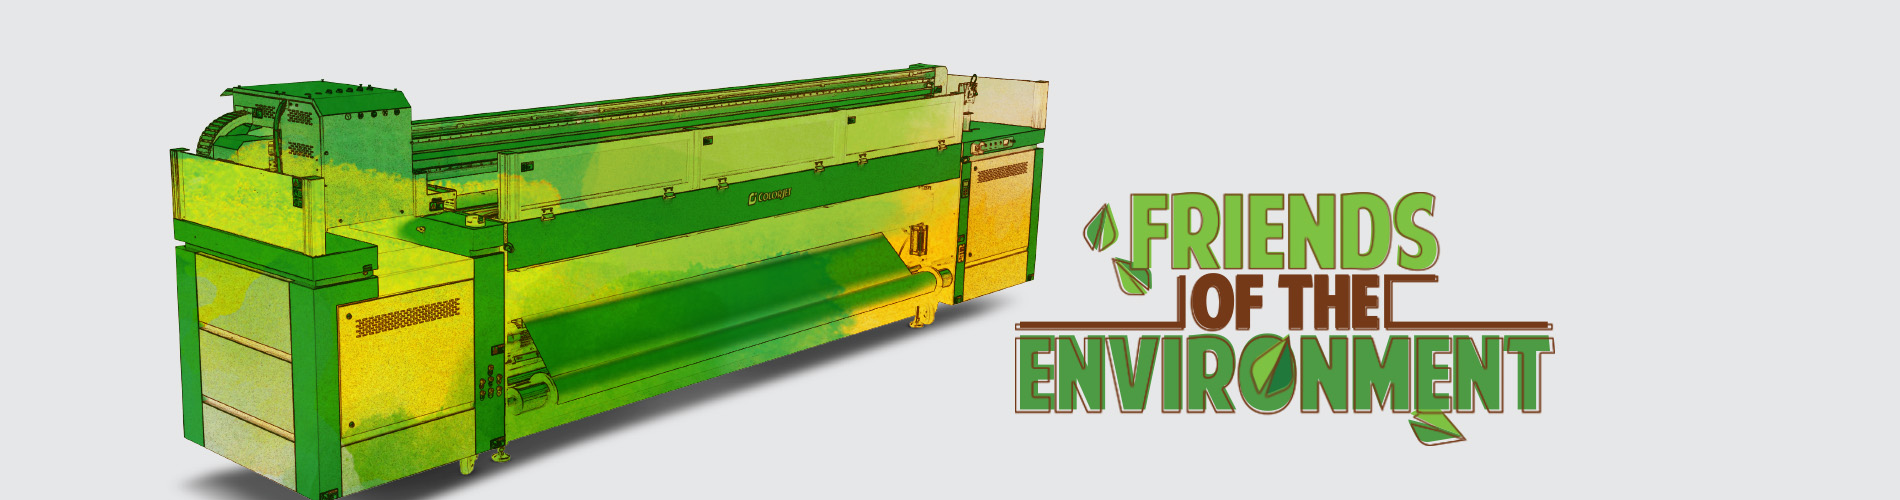 Colorjet ewaste recycling program friends of the environment